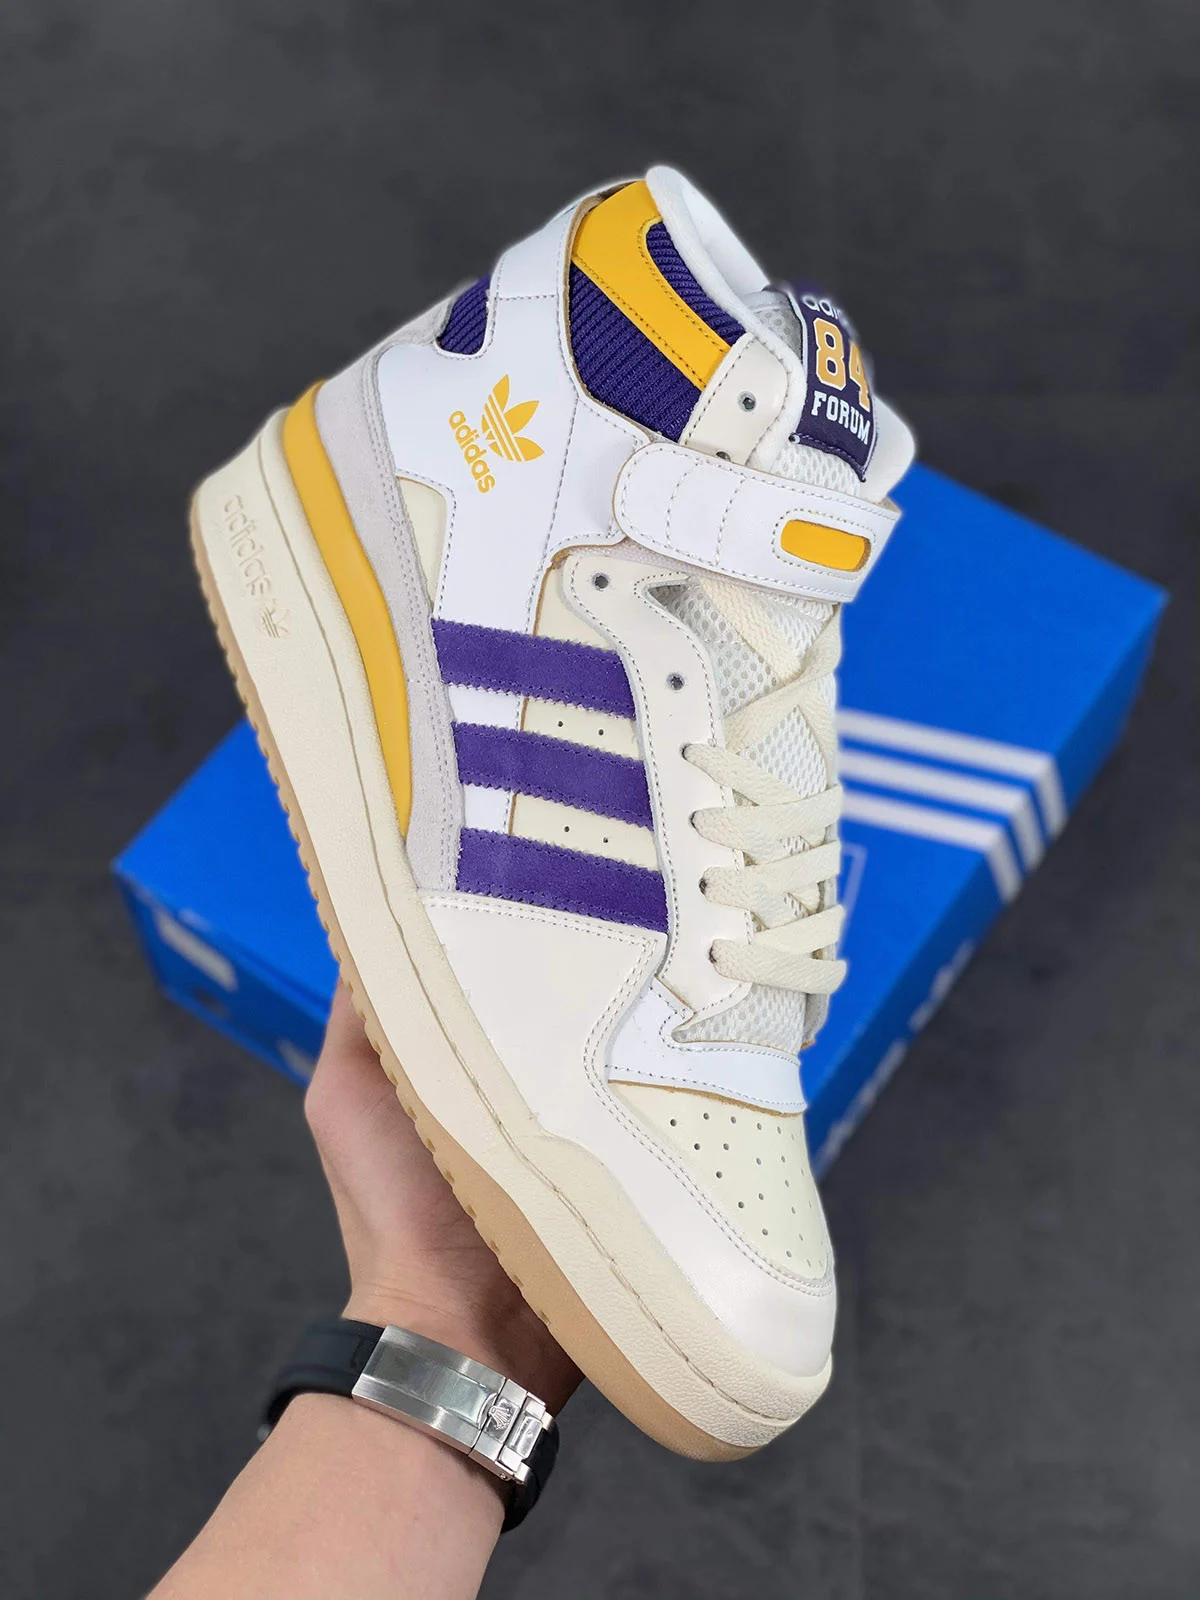 Adidas Forum 84 High Lakers White Purple GX9054 For Sale